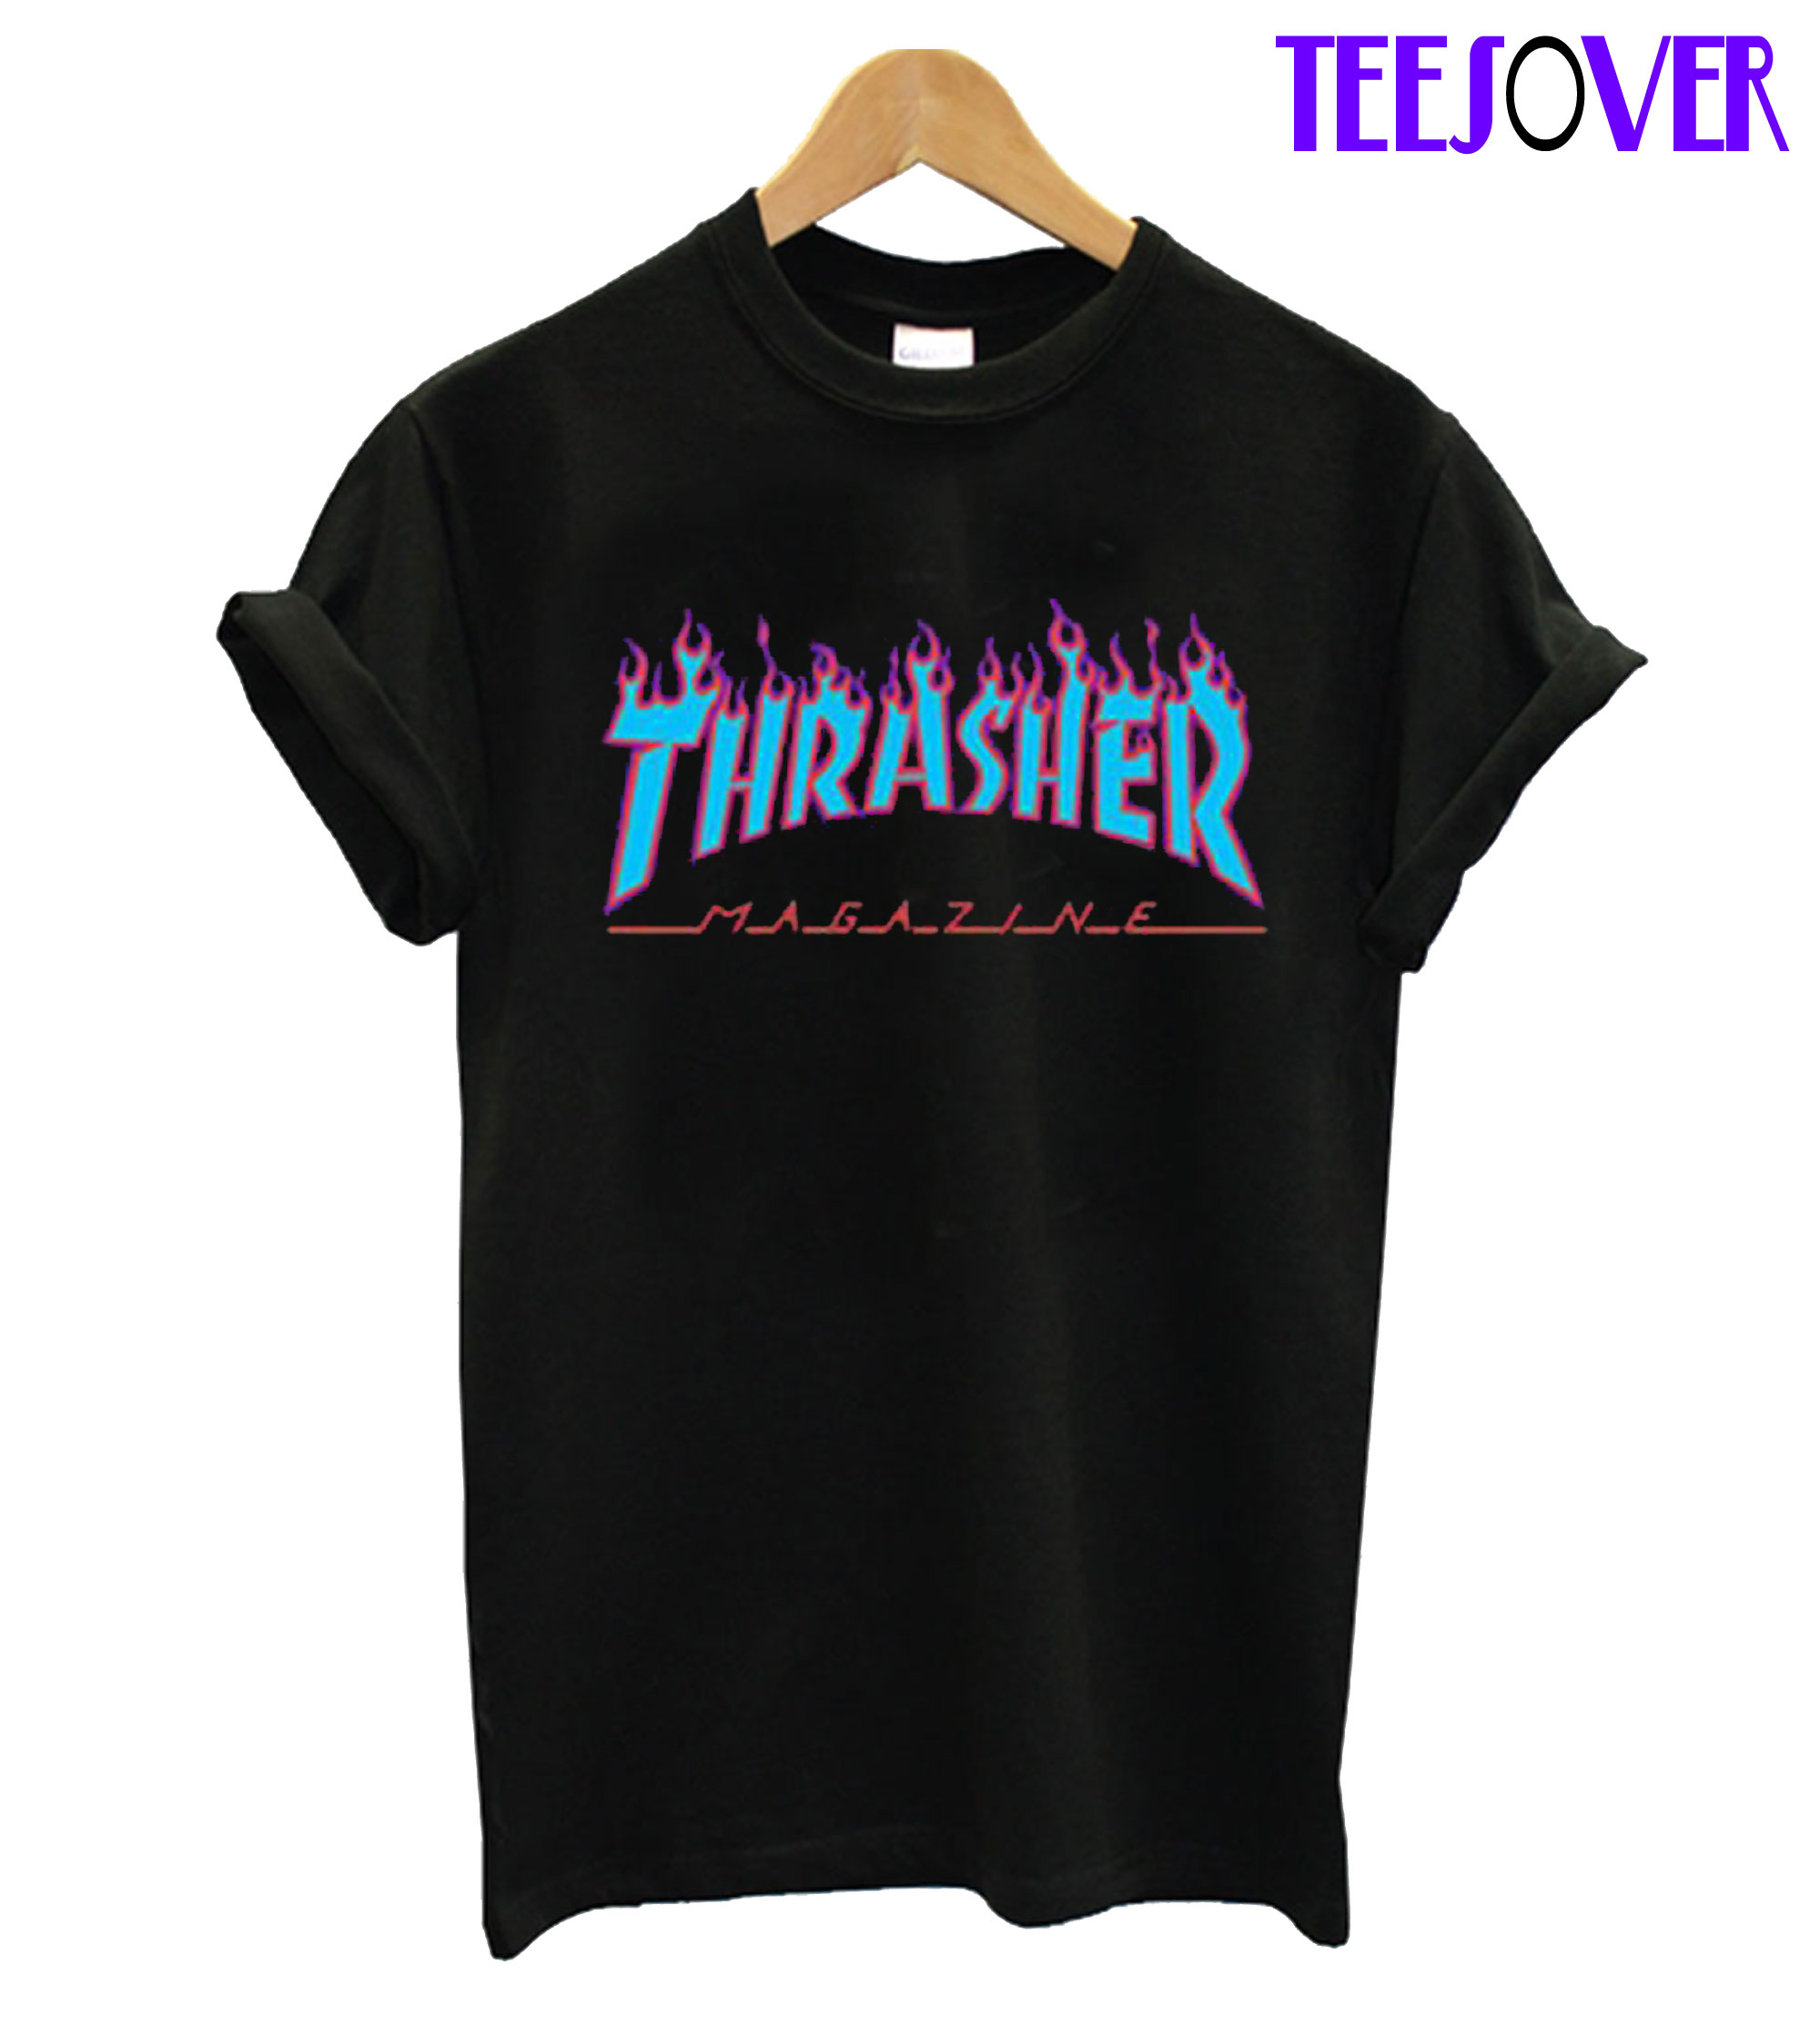 grey and red thrasher shirt